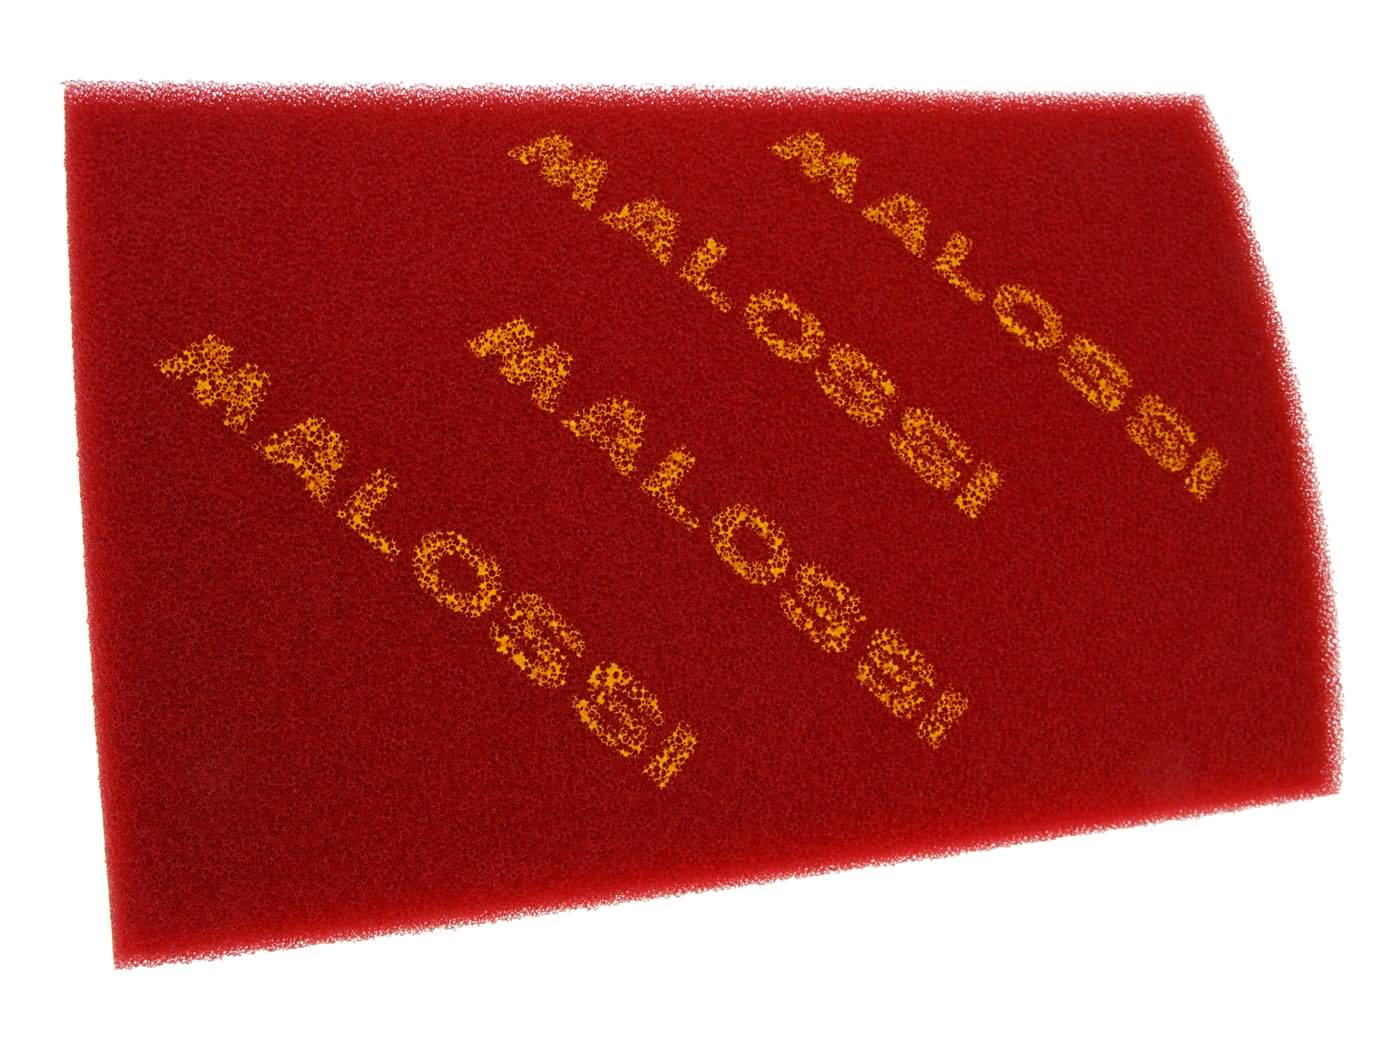 Malossi Double Red Sponge 300x200mm - Luftfilter